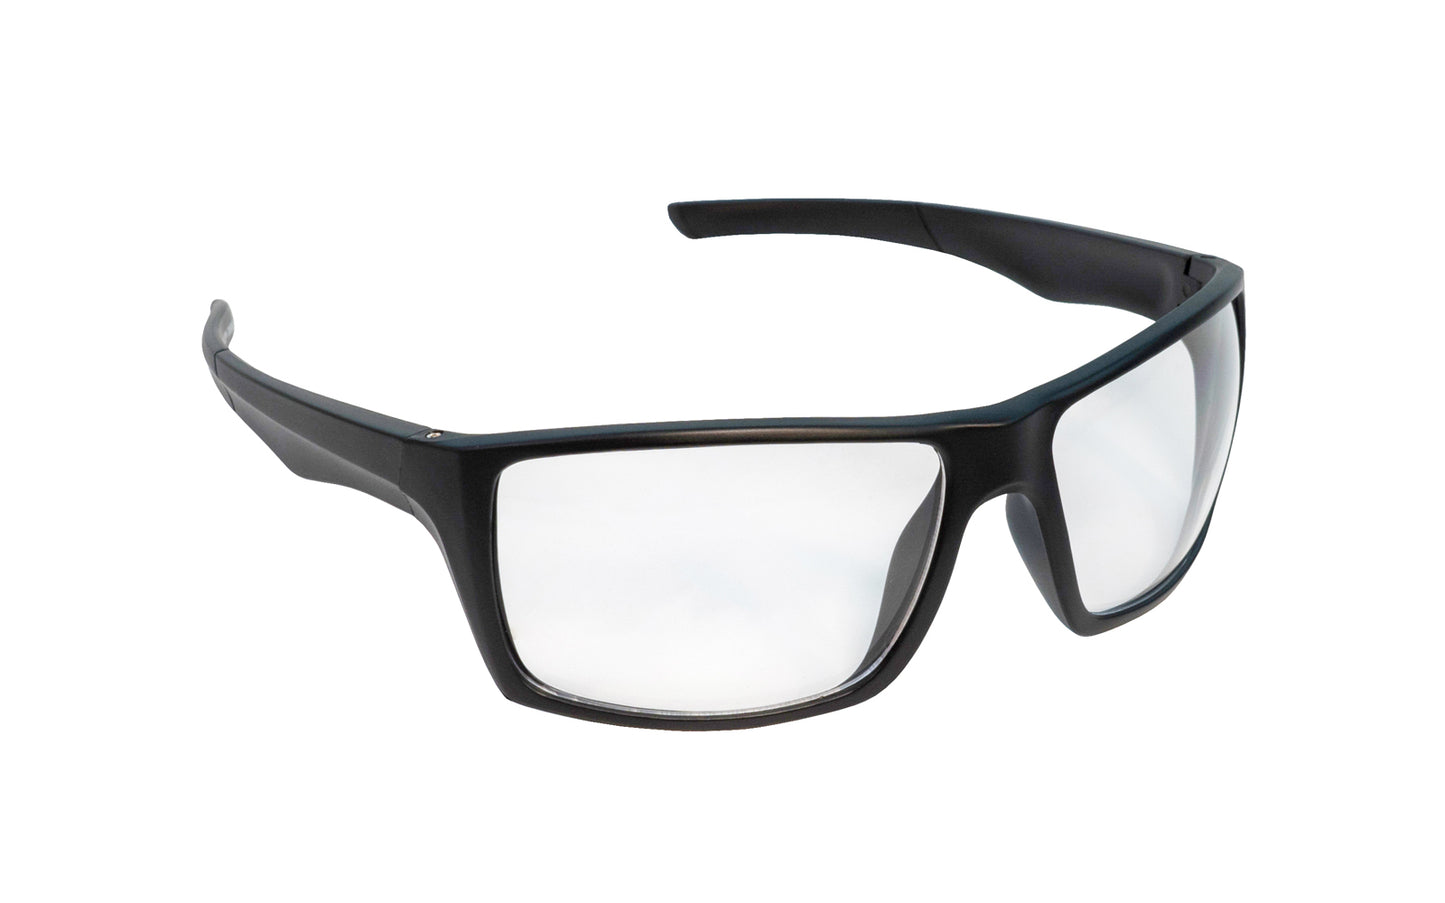 Fastcap "Hipster" Safety Glasses have clear lenses & are great for the shop & also good for outdoor sporting activities. Anti-fog & anti-static lenses.  ANSI rated Z87.1. No magnification. UV Protection - UVB 95% UVA 60%. ANSI / OSHA approved. Shatterproof & scratch resistant. 663807020888. FastCap Model SG-HIPSTER